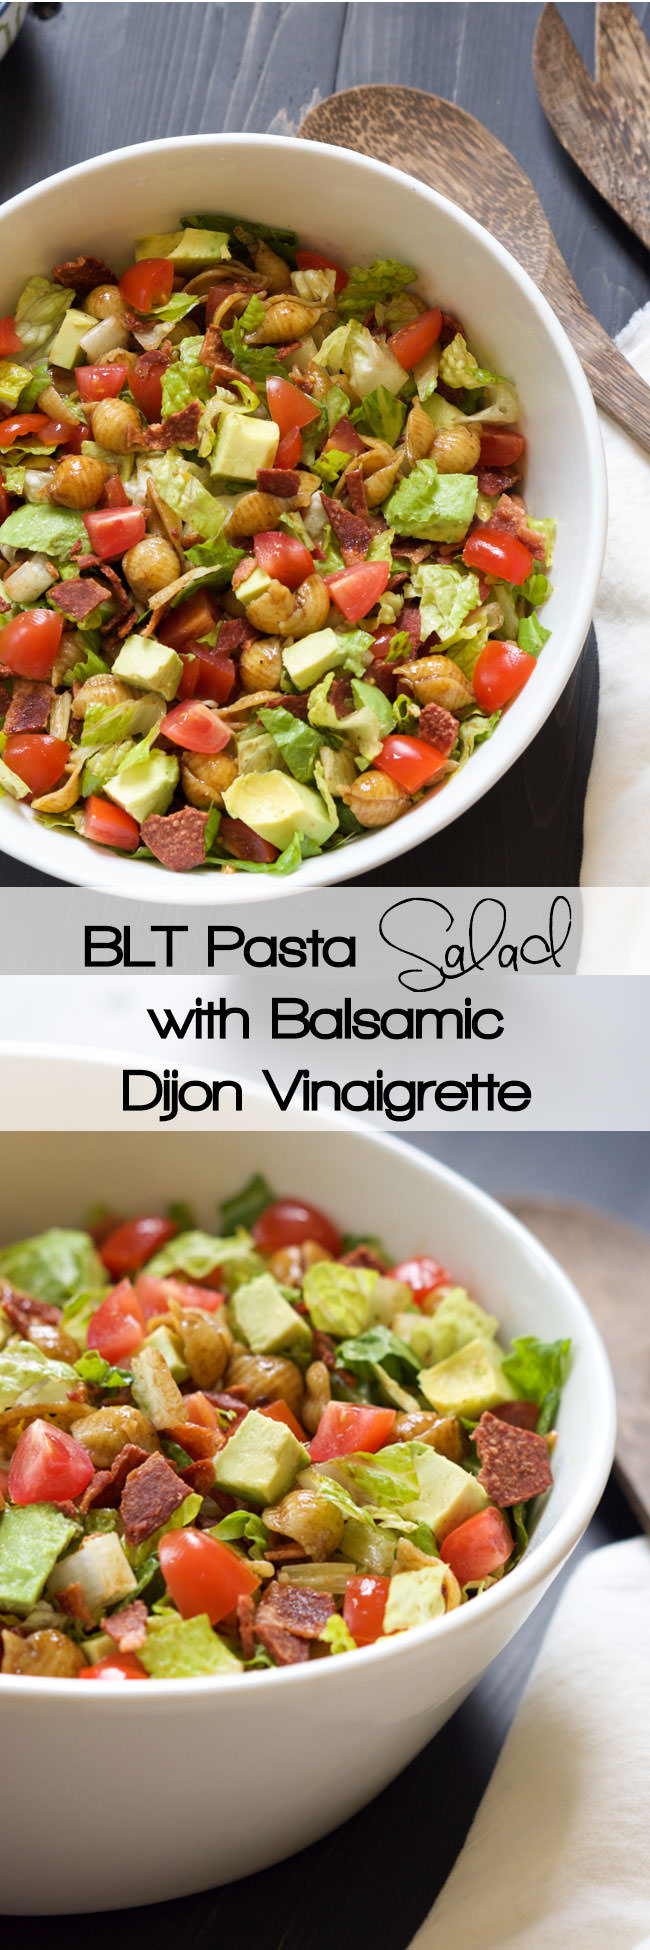 A favorite sandwich gets a pasta salad makeover! BLT Pasta Salad is a combination of bacon, tomatoes and lettuce with avocado added for one flavorful dish!